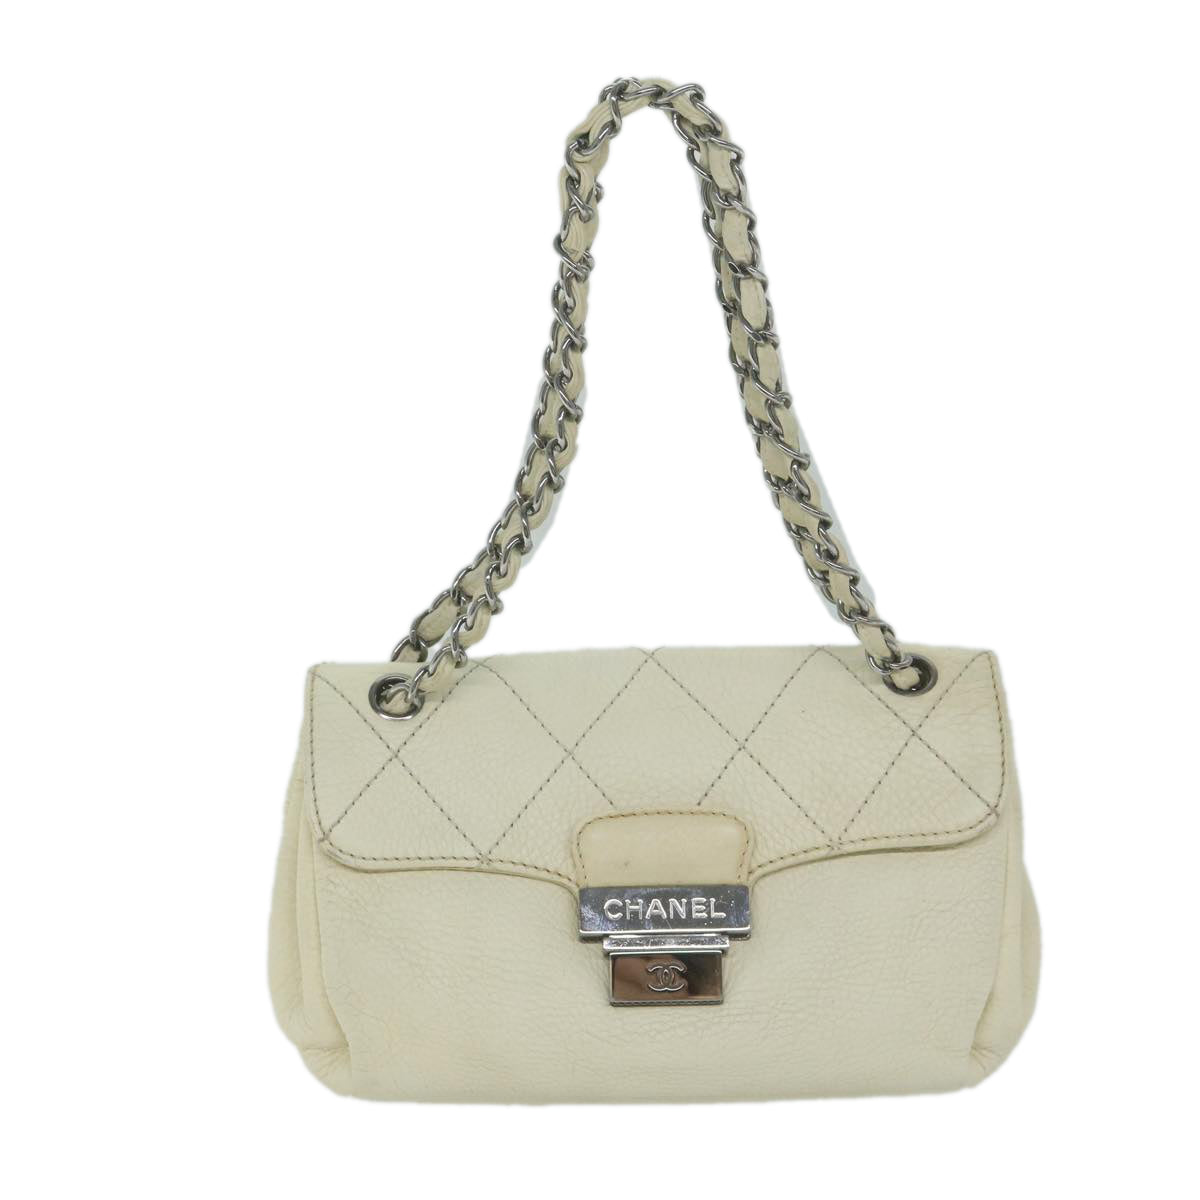 CHANEL Chain Shoulder Bag Leather White CC Auth bs10926 - 0